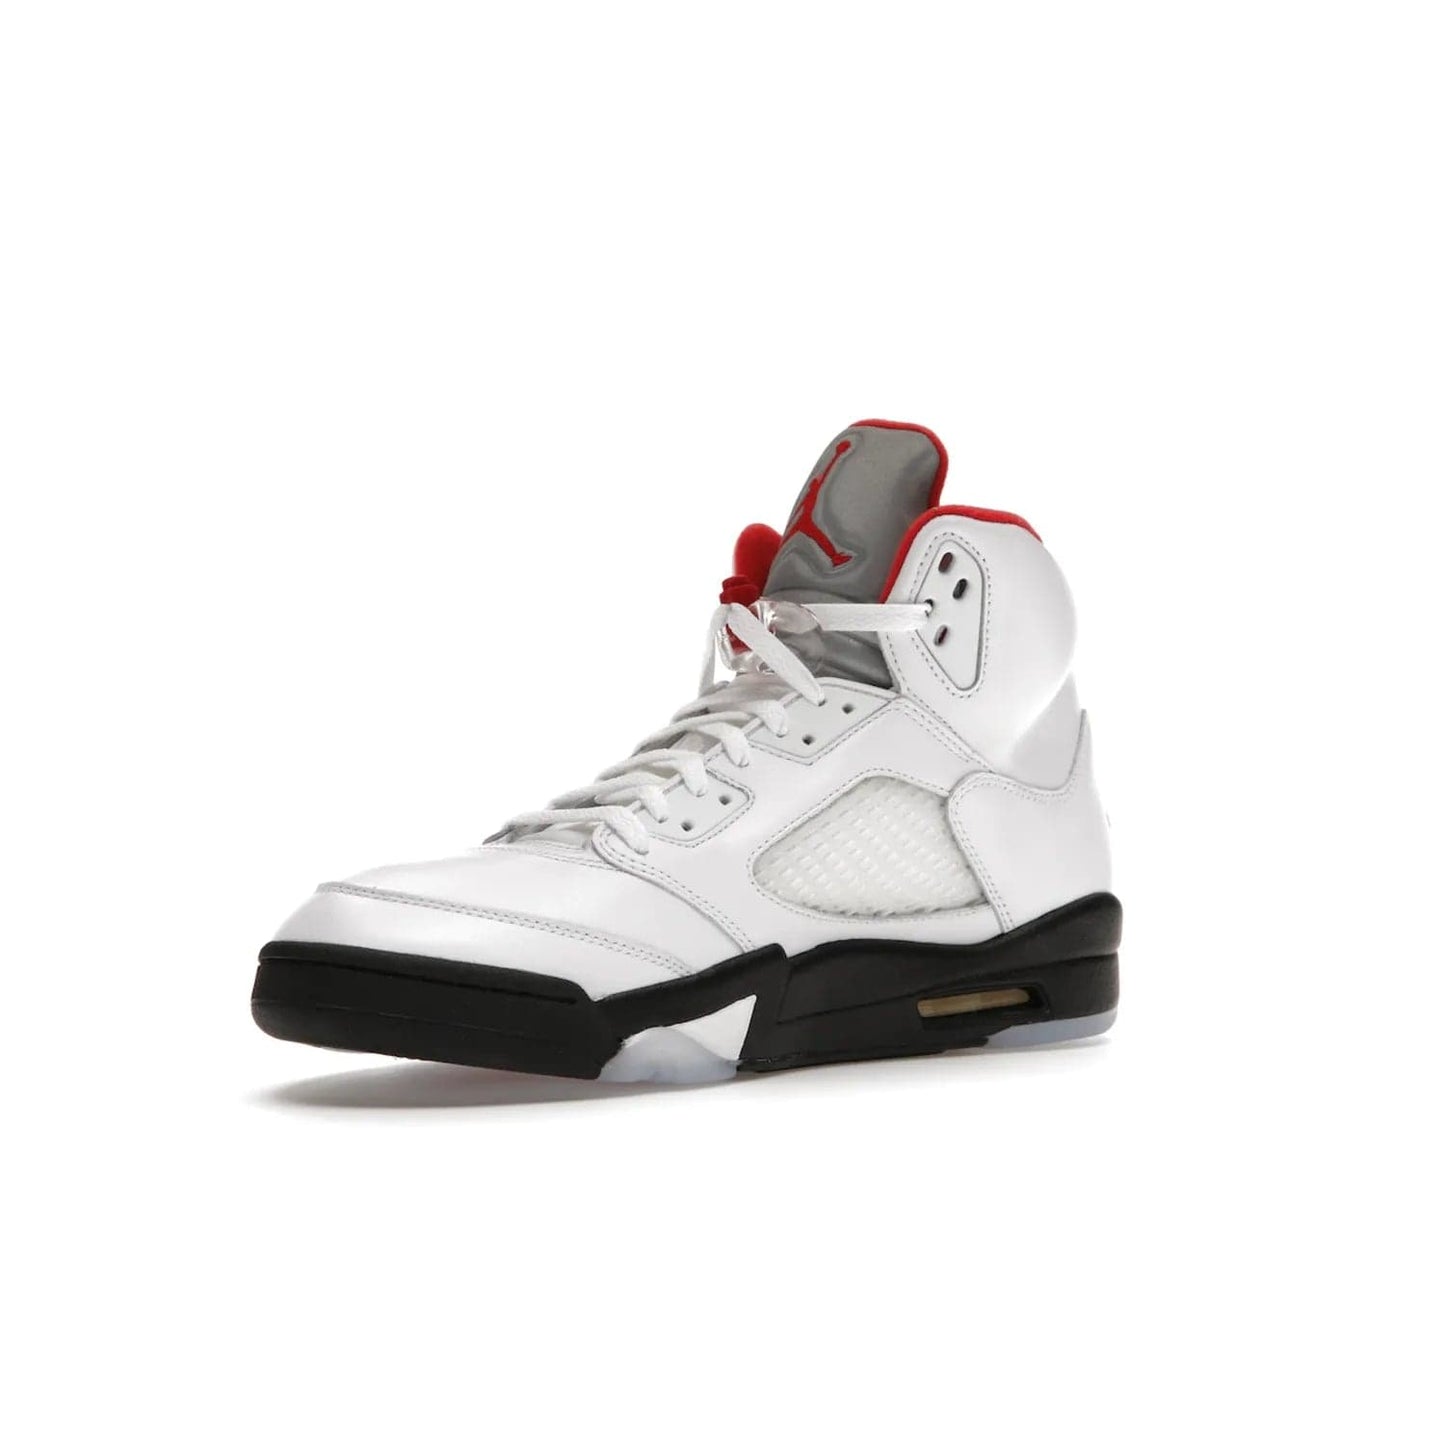 Jordan 5 Retro Fire Red Silver Tongue (2020) - Image 15 - Only at www.BallersClubKickz.com - Experience classic styling with the Jordan 5 Retro Fire Red Silver Tongue (2020). Features a white leather upper, 3M reflective tongue, midsole colorblocking, and an icy translucent outsole. Now available, upgrade your shoe collection today.